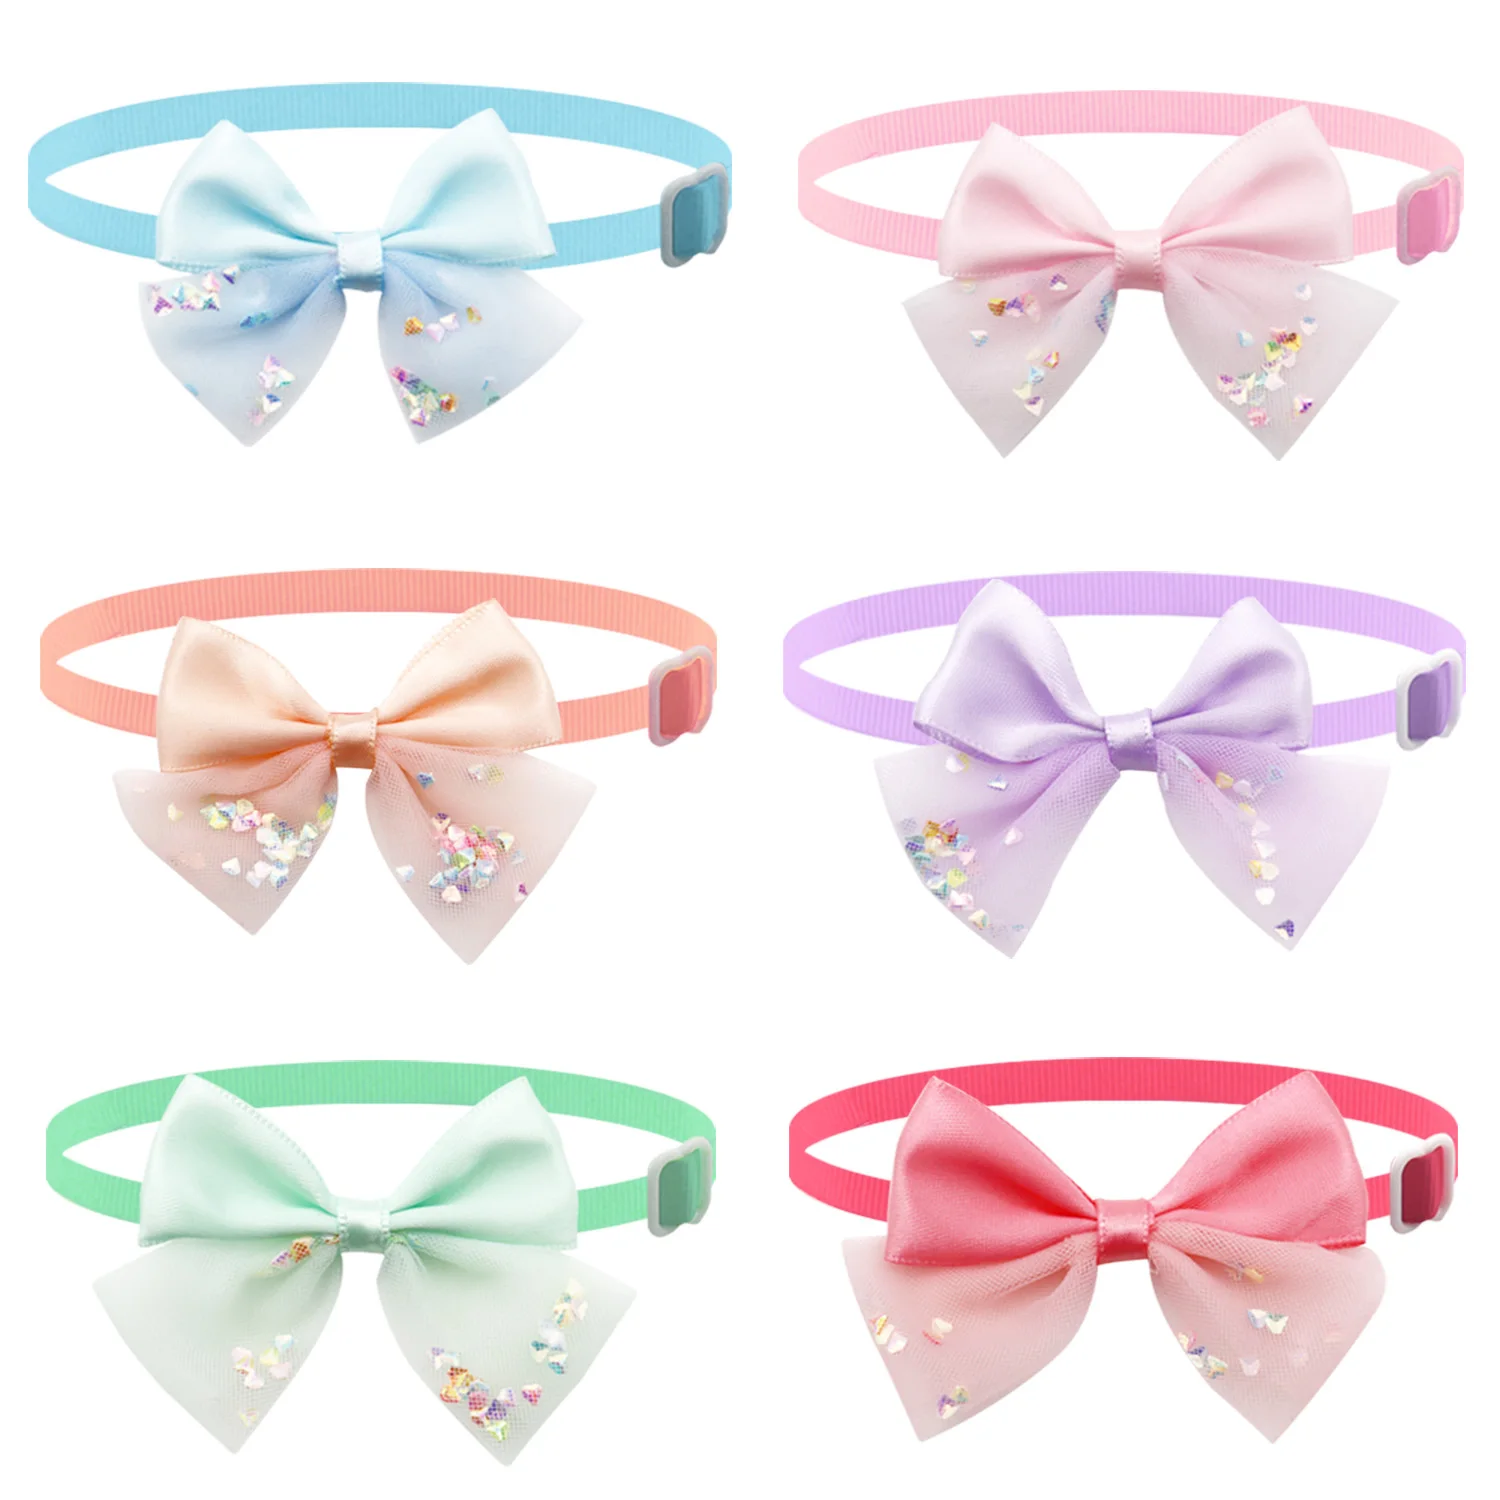 

Accessories Bowtie Dog Bows Product Bling Cat Dog Ties Girls Puppies Bows Grooming Yarn Collar Pet 50/100pcs For Soft Adjustable